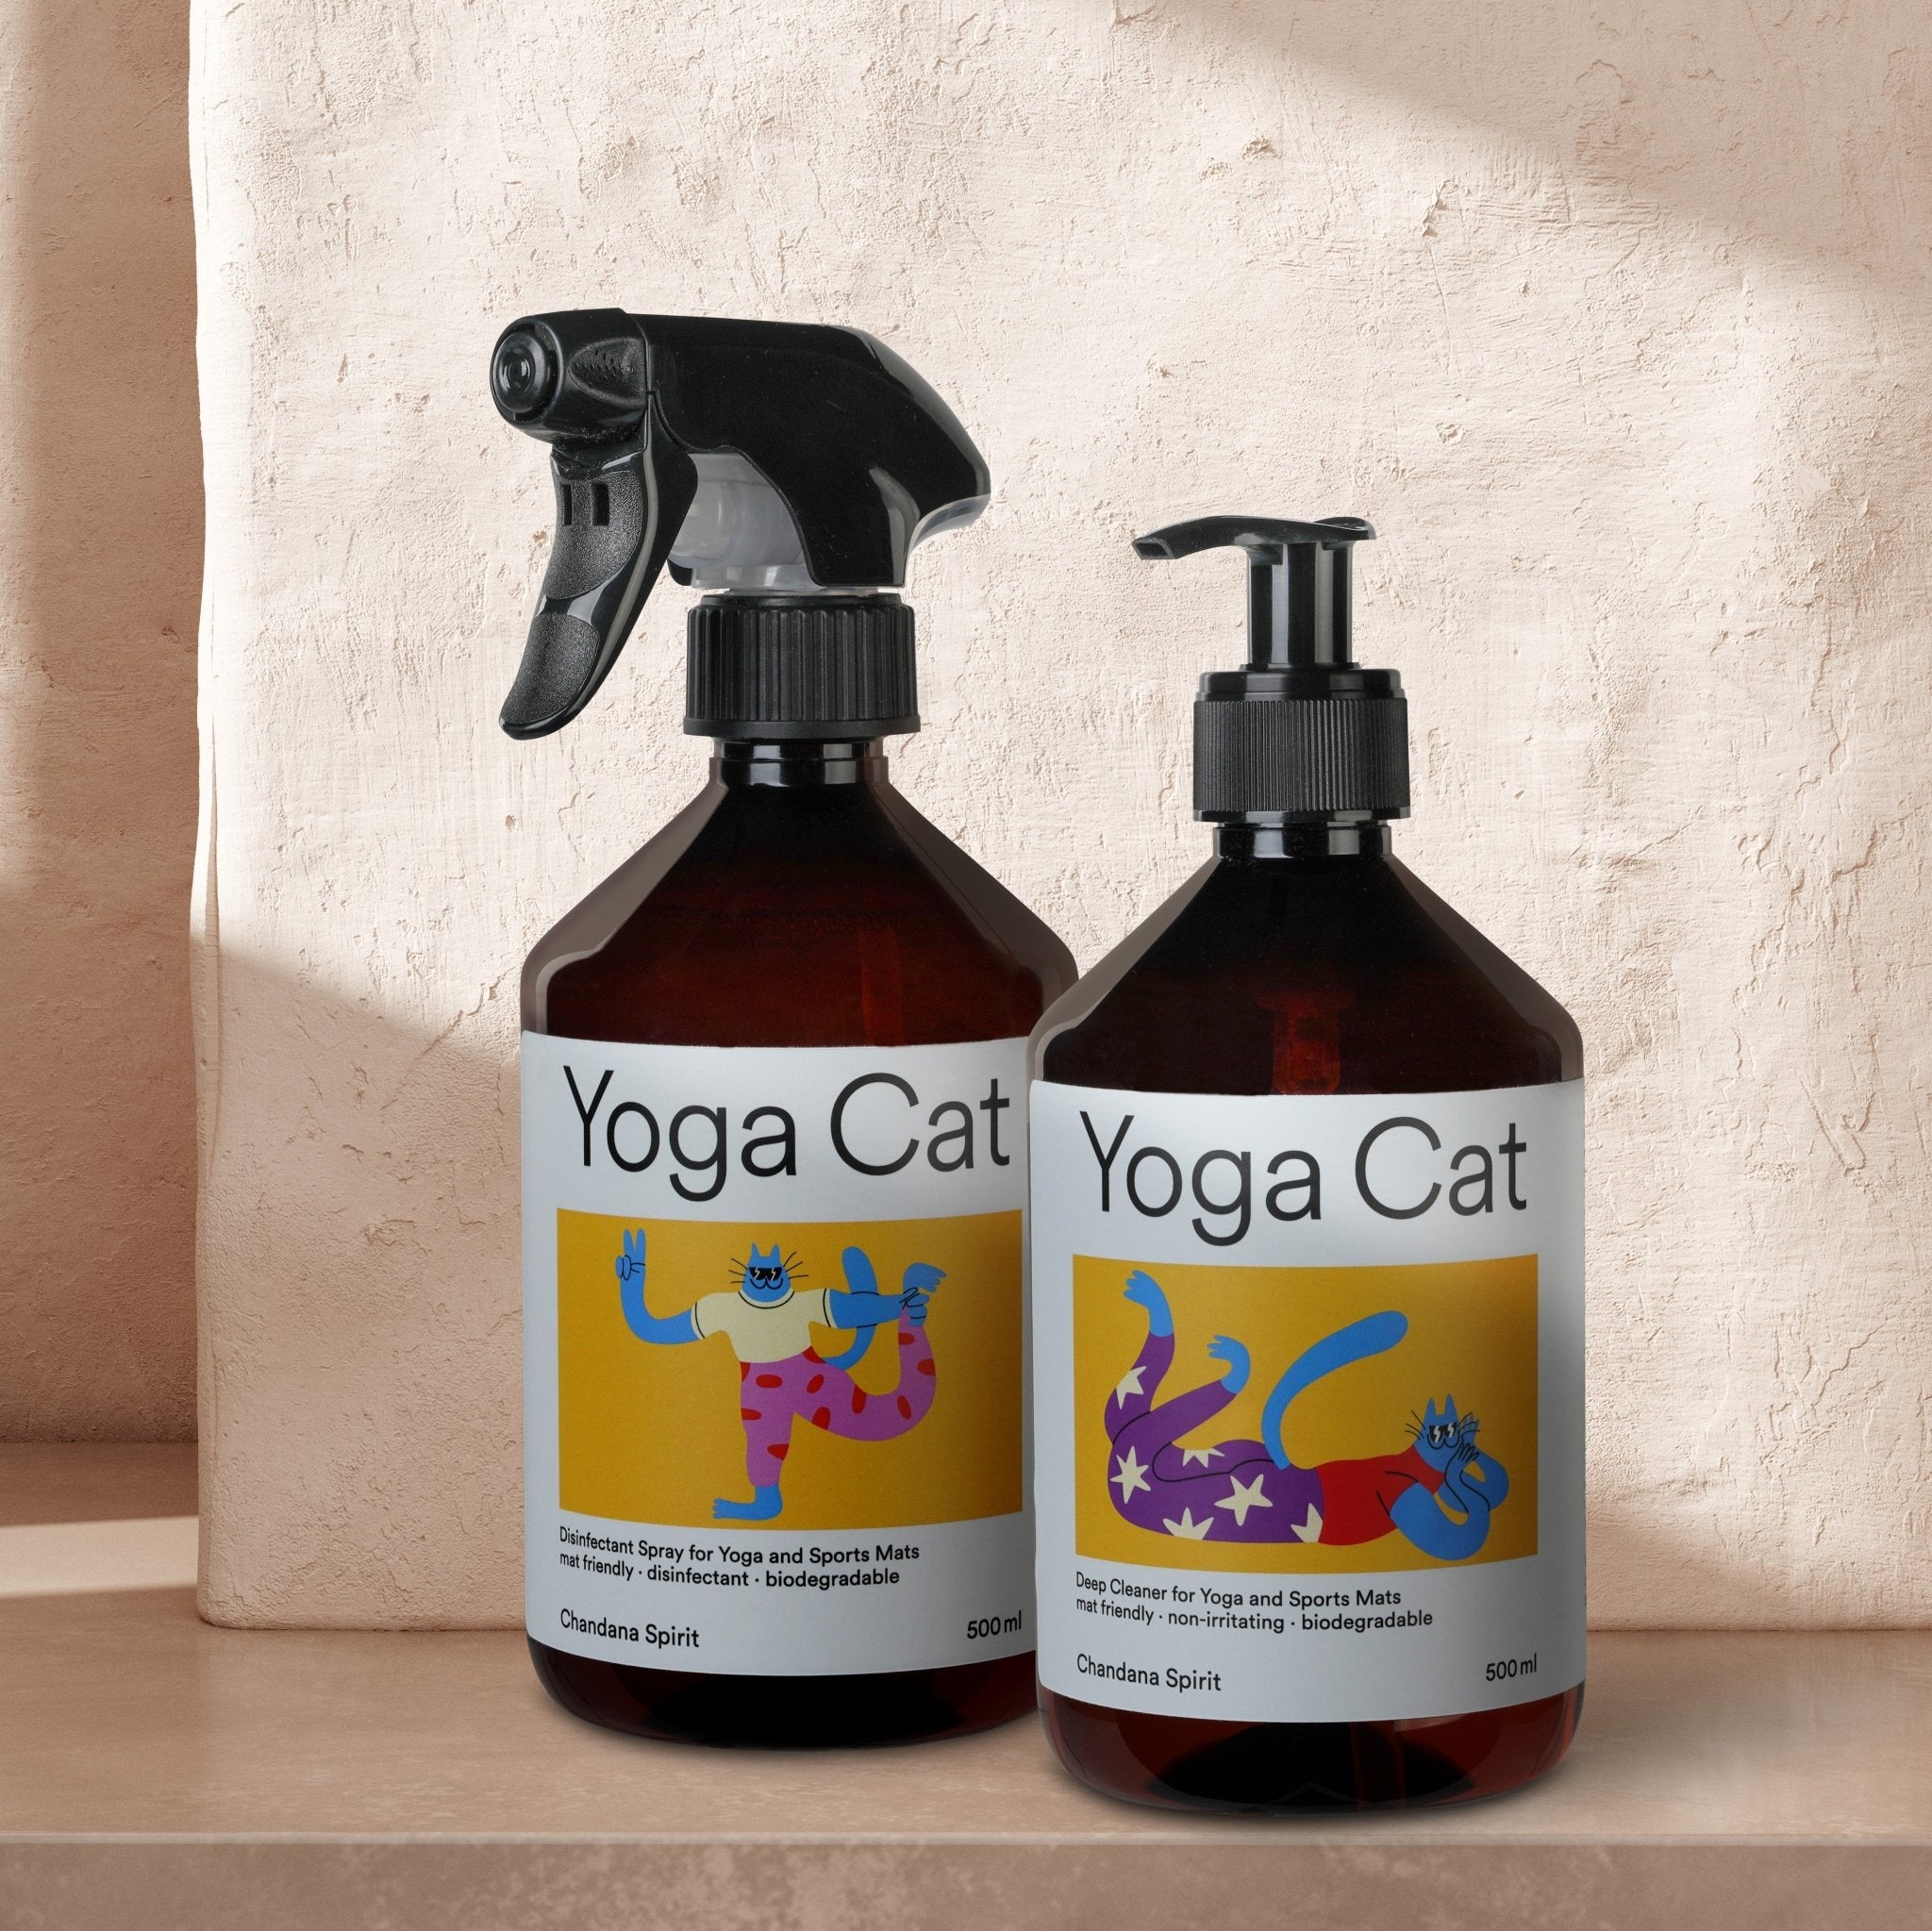 How to Properly Clean Your Yoga Mat - yogacat.com